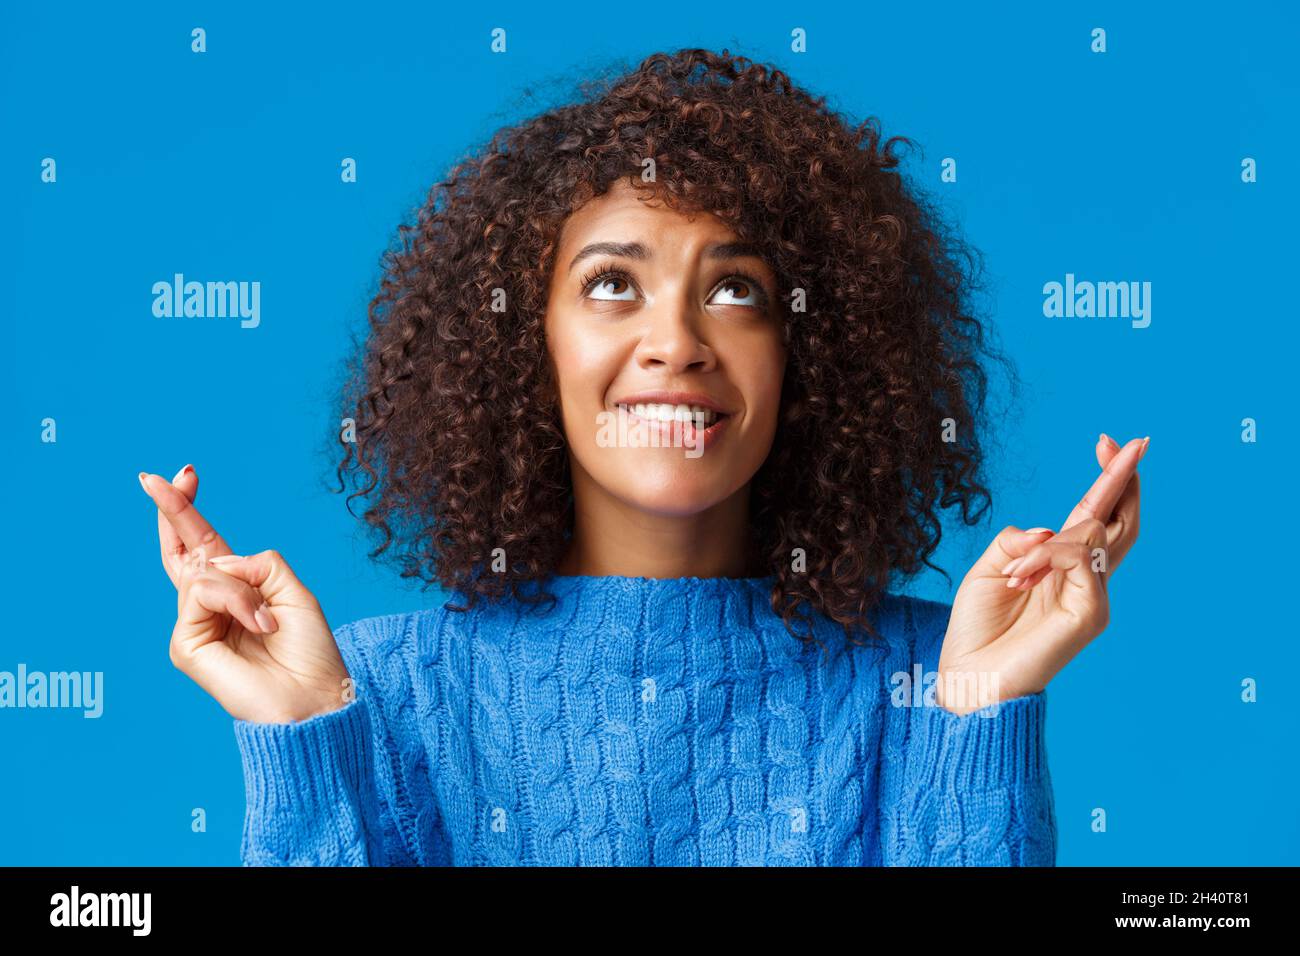 Girl begging god her dream come true. Cute and silly african-american curly-haired female with afro haircut, biting lip from tem Stock Photo